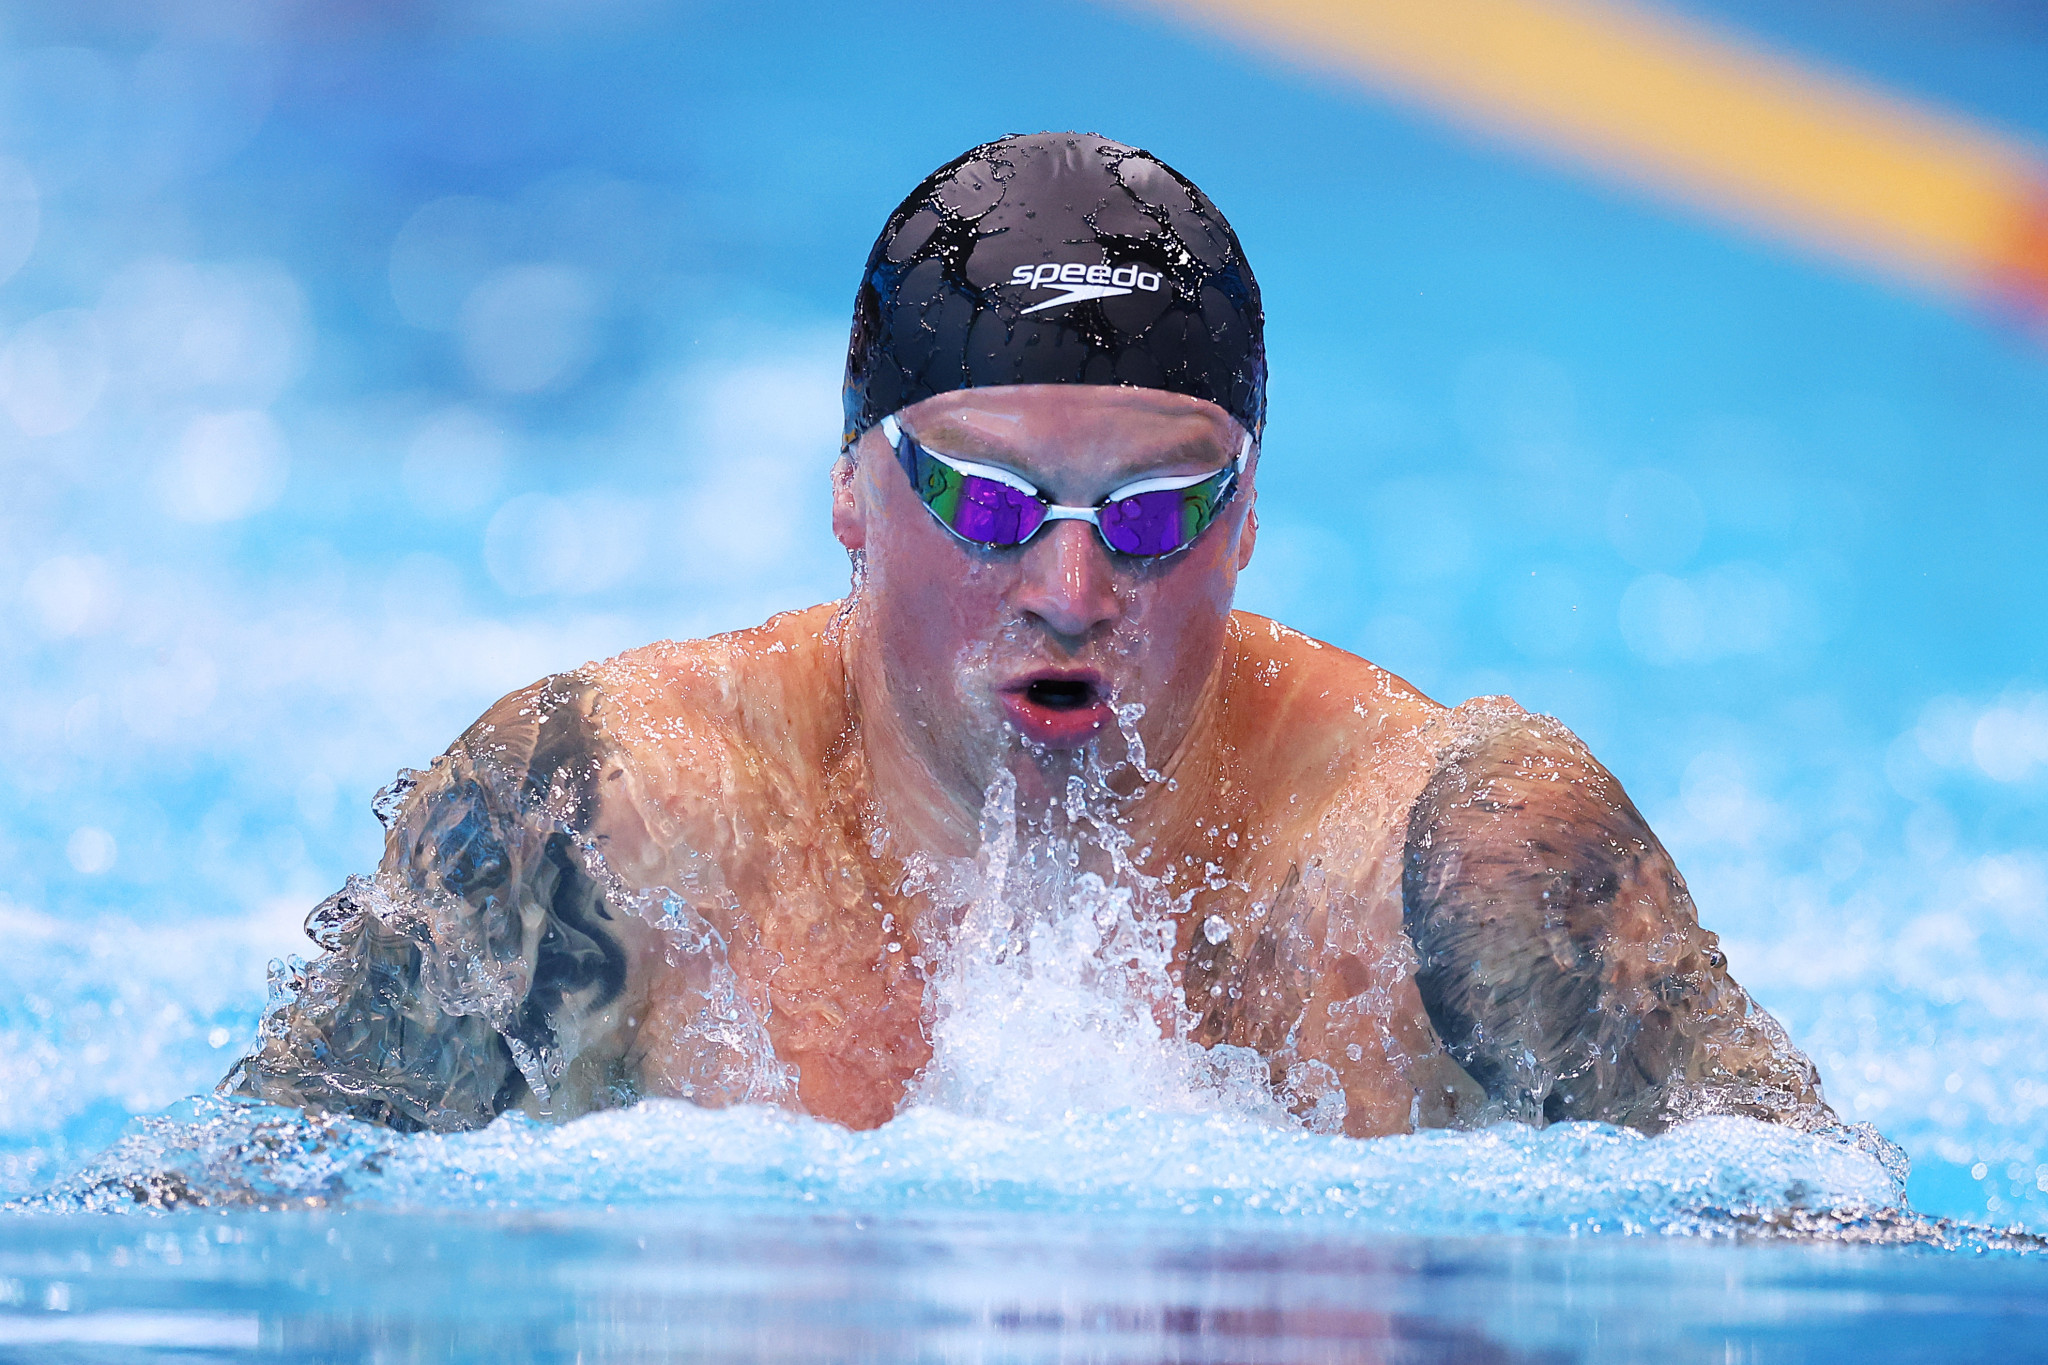 Adam Peaty has overcome personal challenges and is ready to triumph at Paris 2024. GETTY IMAGES